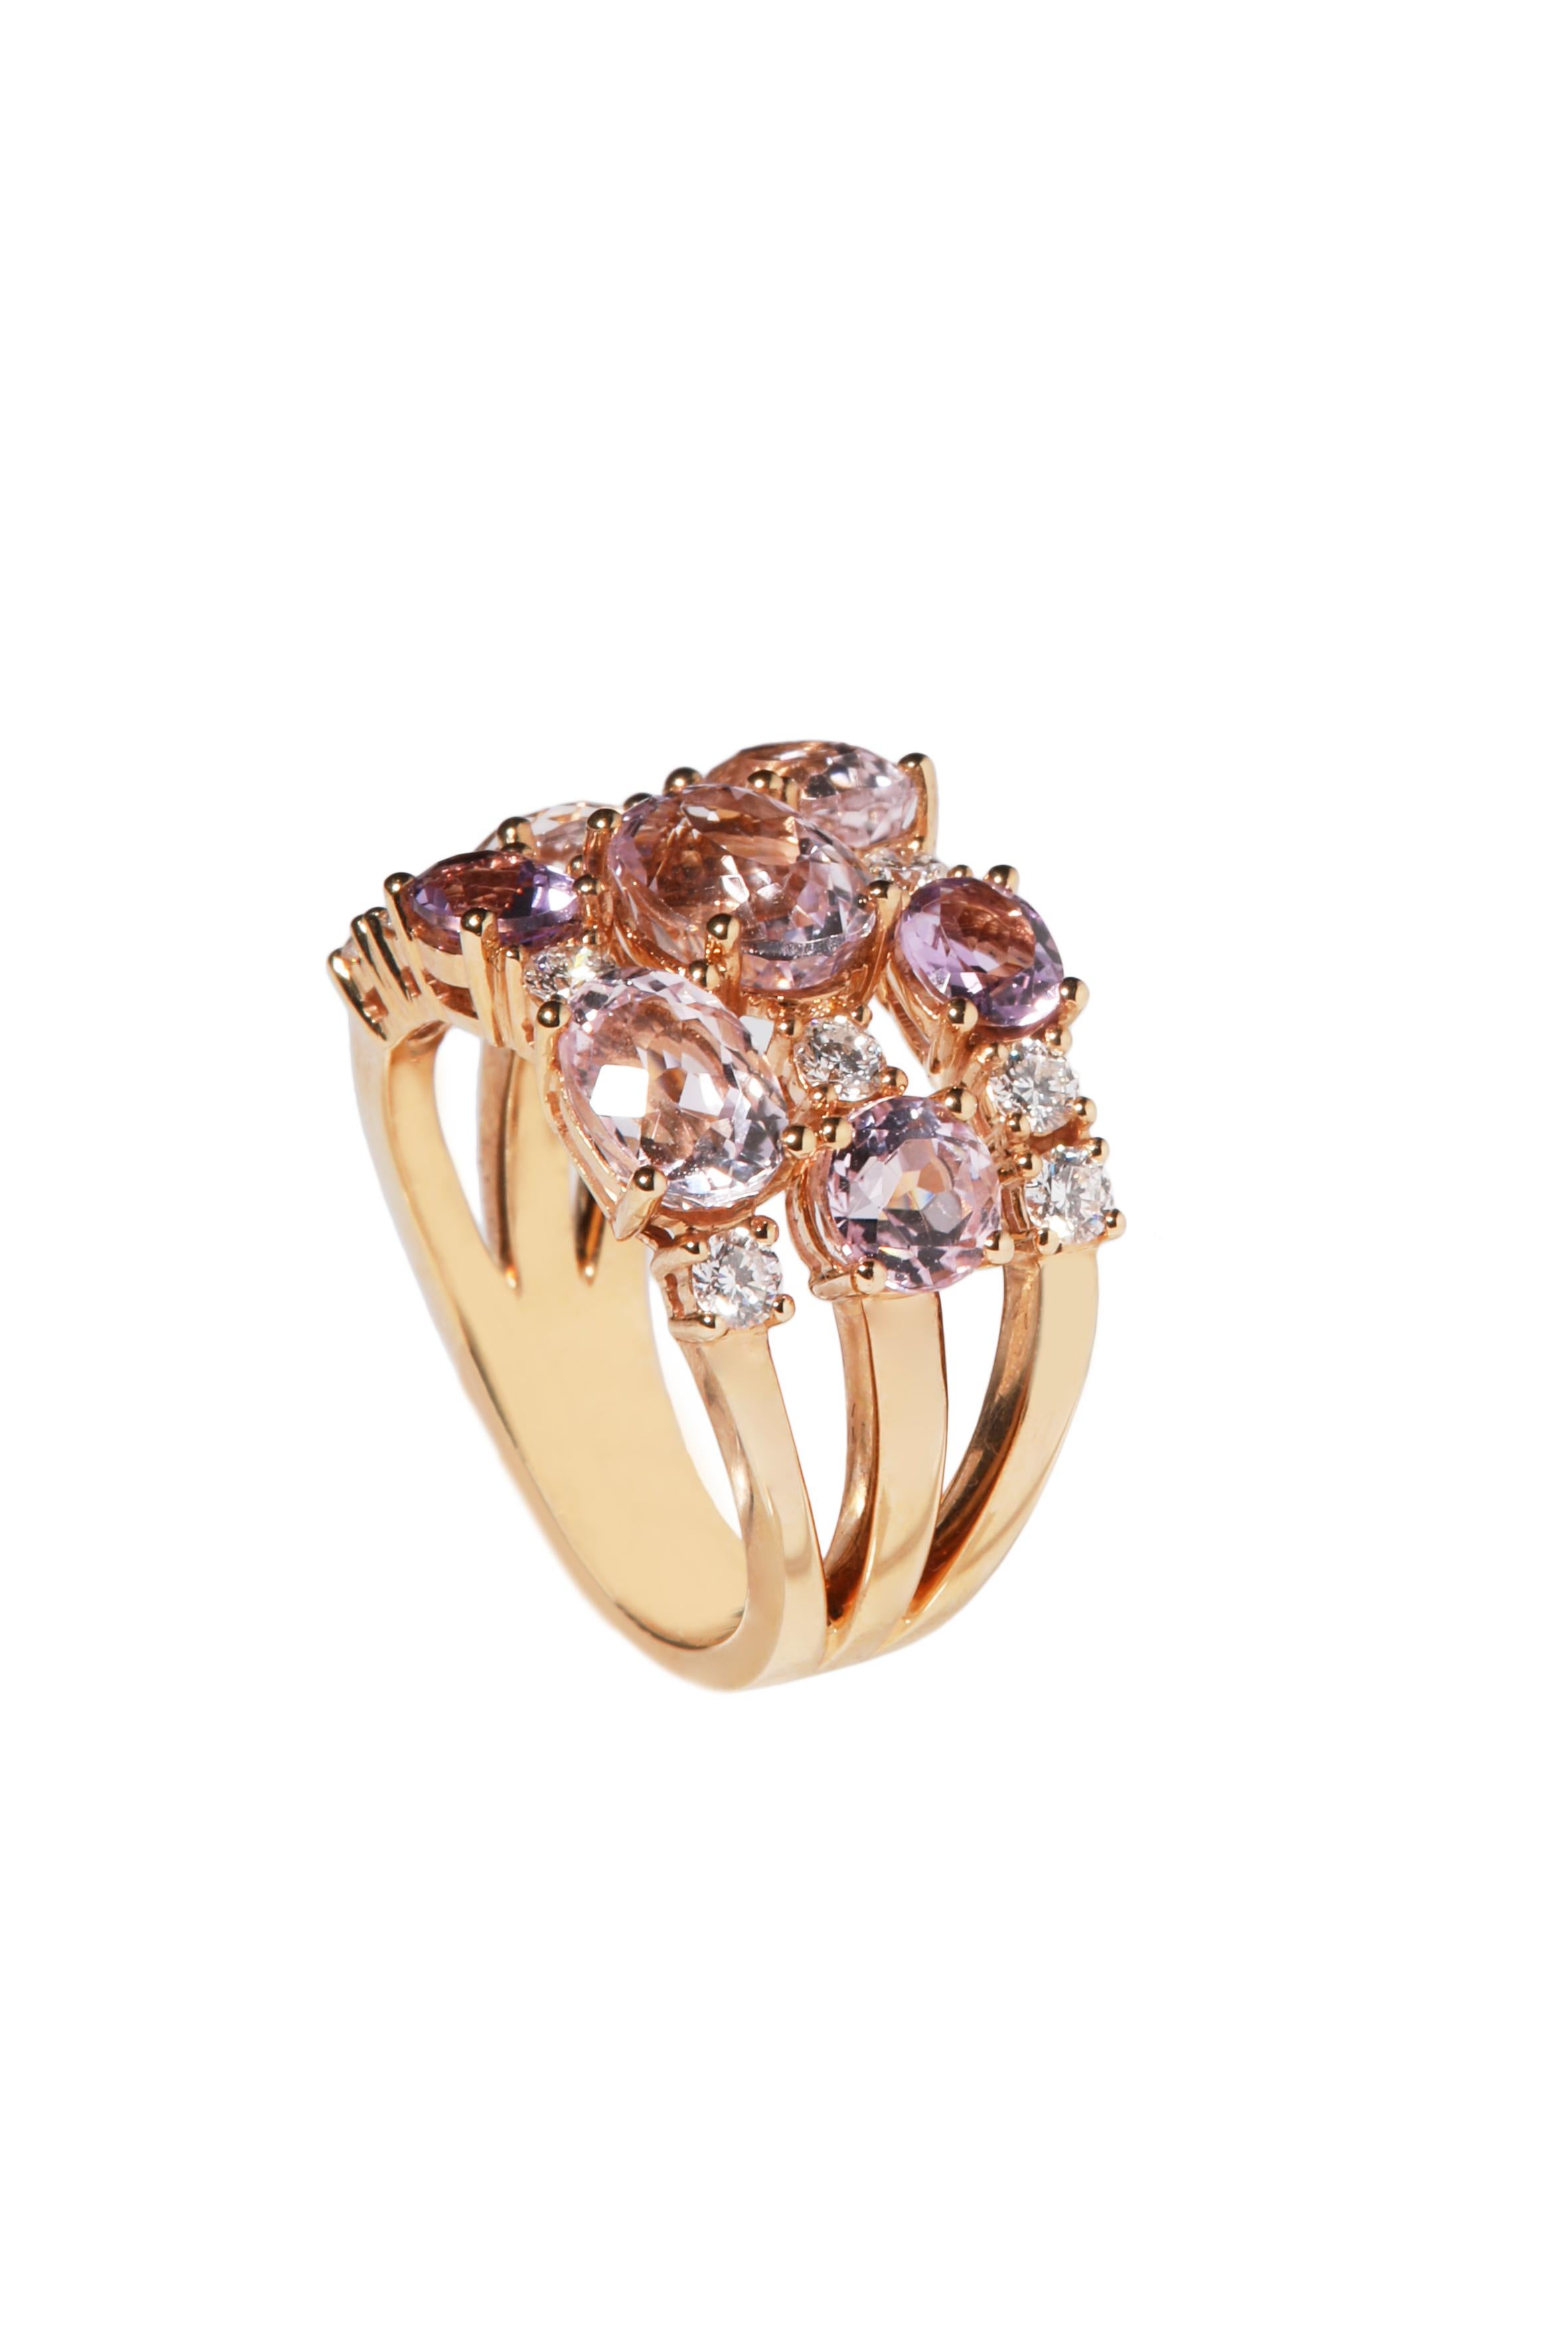 18kt rose gold ring is set with round and oval cut amethysts and kunzites, a total of 5.42 carat of gemstones.
Sparkly brilliant cut diamonds, a total of 0.63 carat, are set in between the pink to violet-pink soft tones, creating a wonderful festive